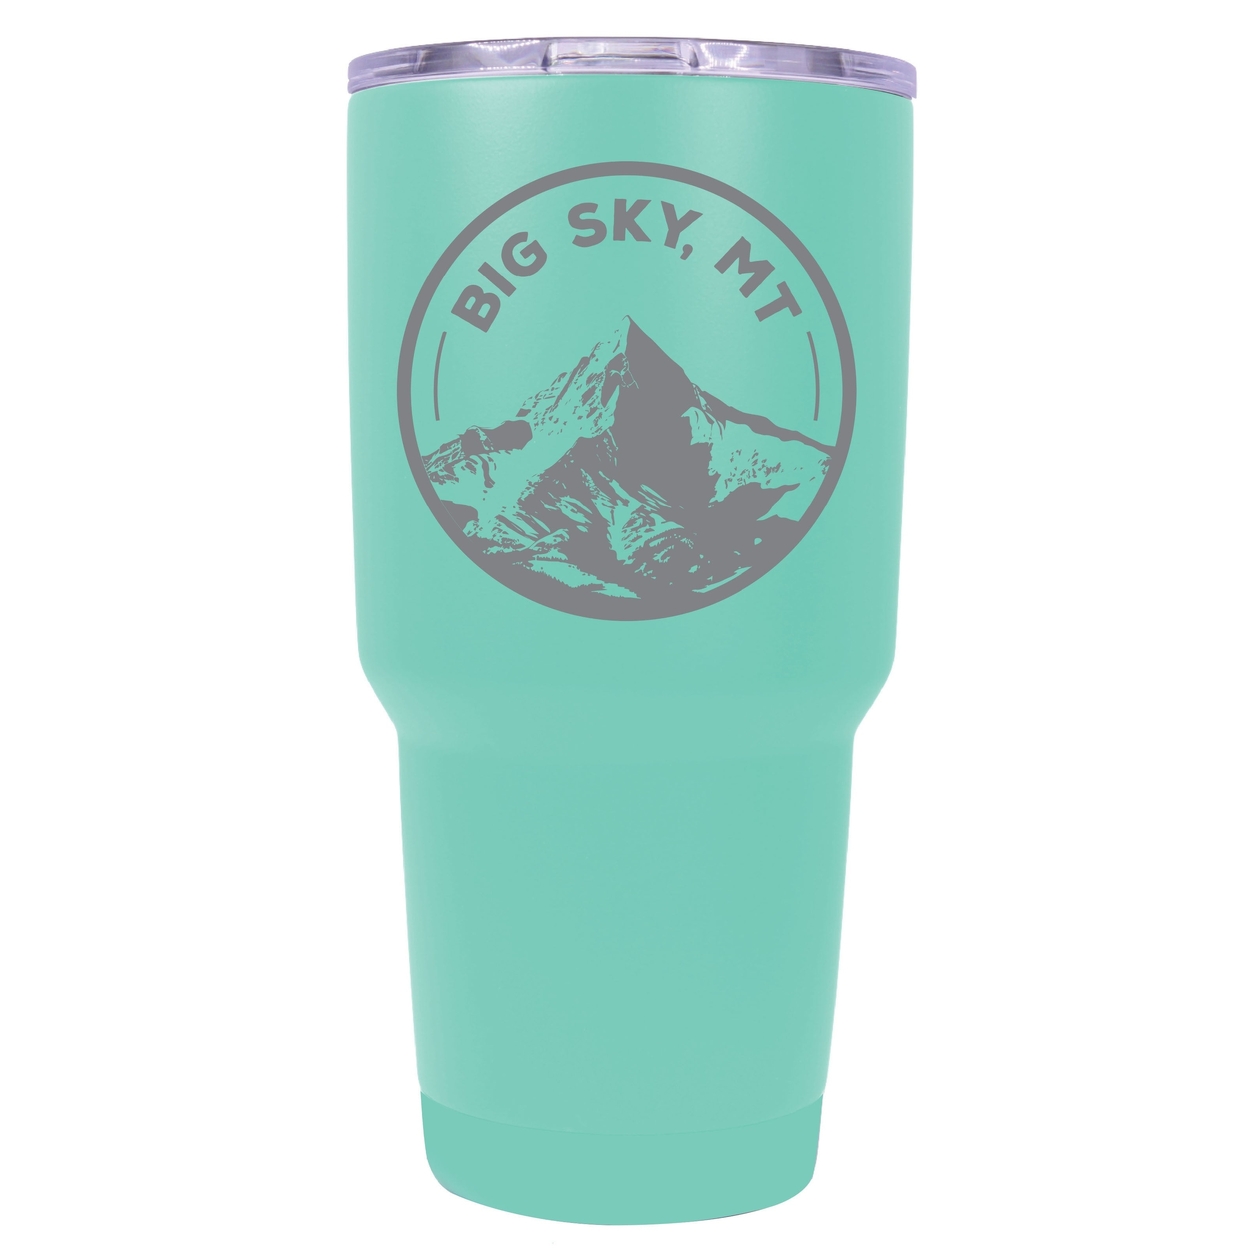 Big Sky Montana Souvenir 24 Oz Engraved Insulated Stainless Steel Tumbler - Red,,4-Pack